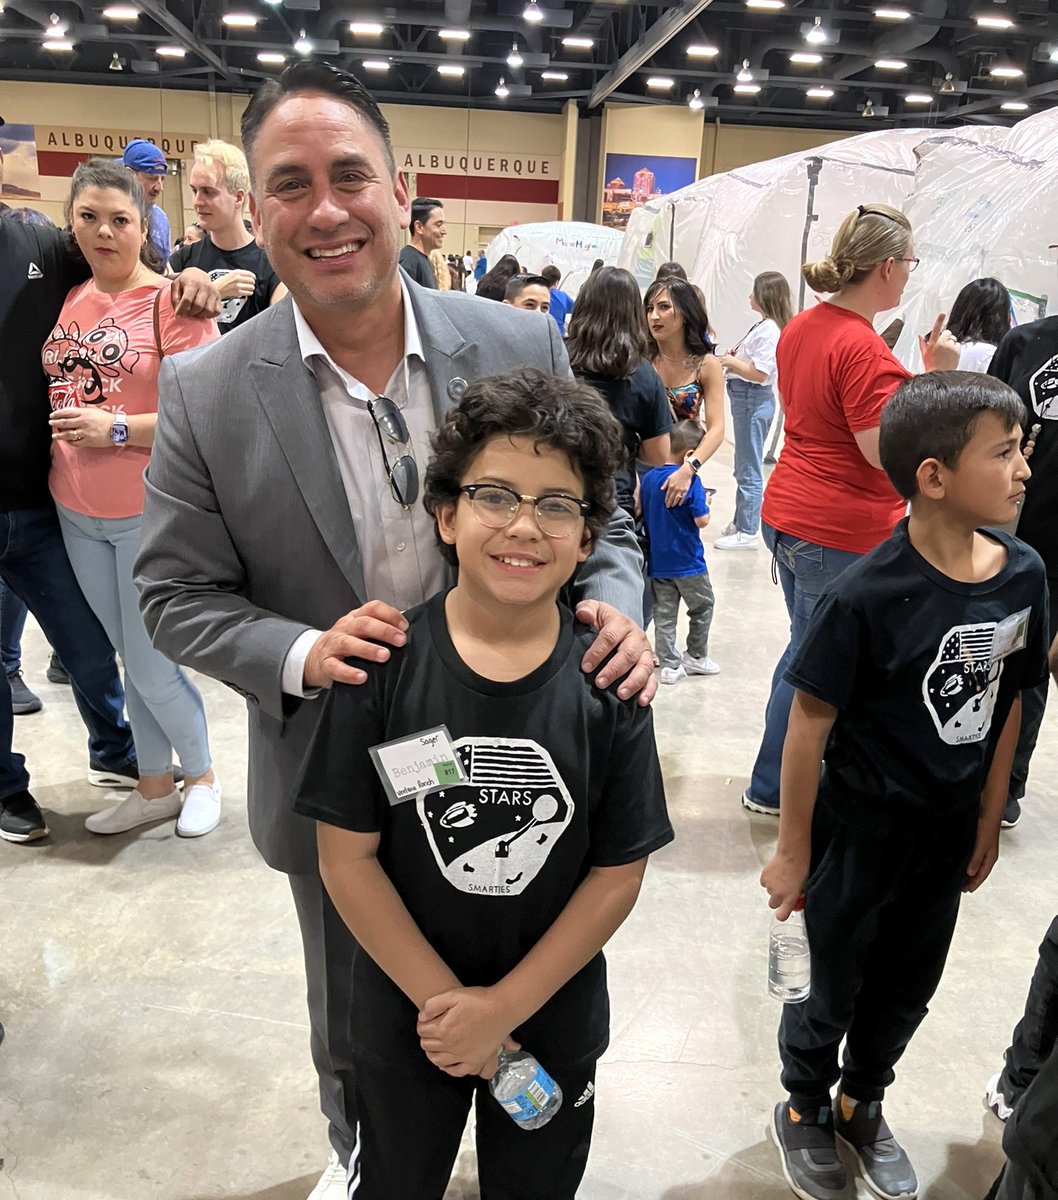 High quality out-of-school-time learning leads to powerful student engagement, creating strong student achievement we all want. Grateful for the partnership of @AFResearchLab & @newmexicotech providing 30 years of great #STEMeducation to New Mexico students thru Mission to Mars.